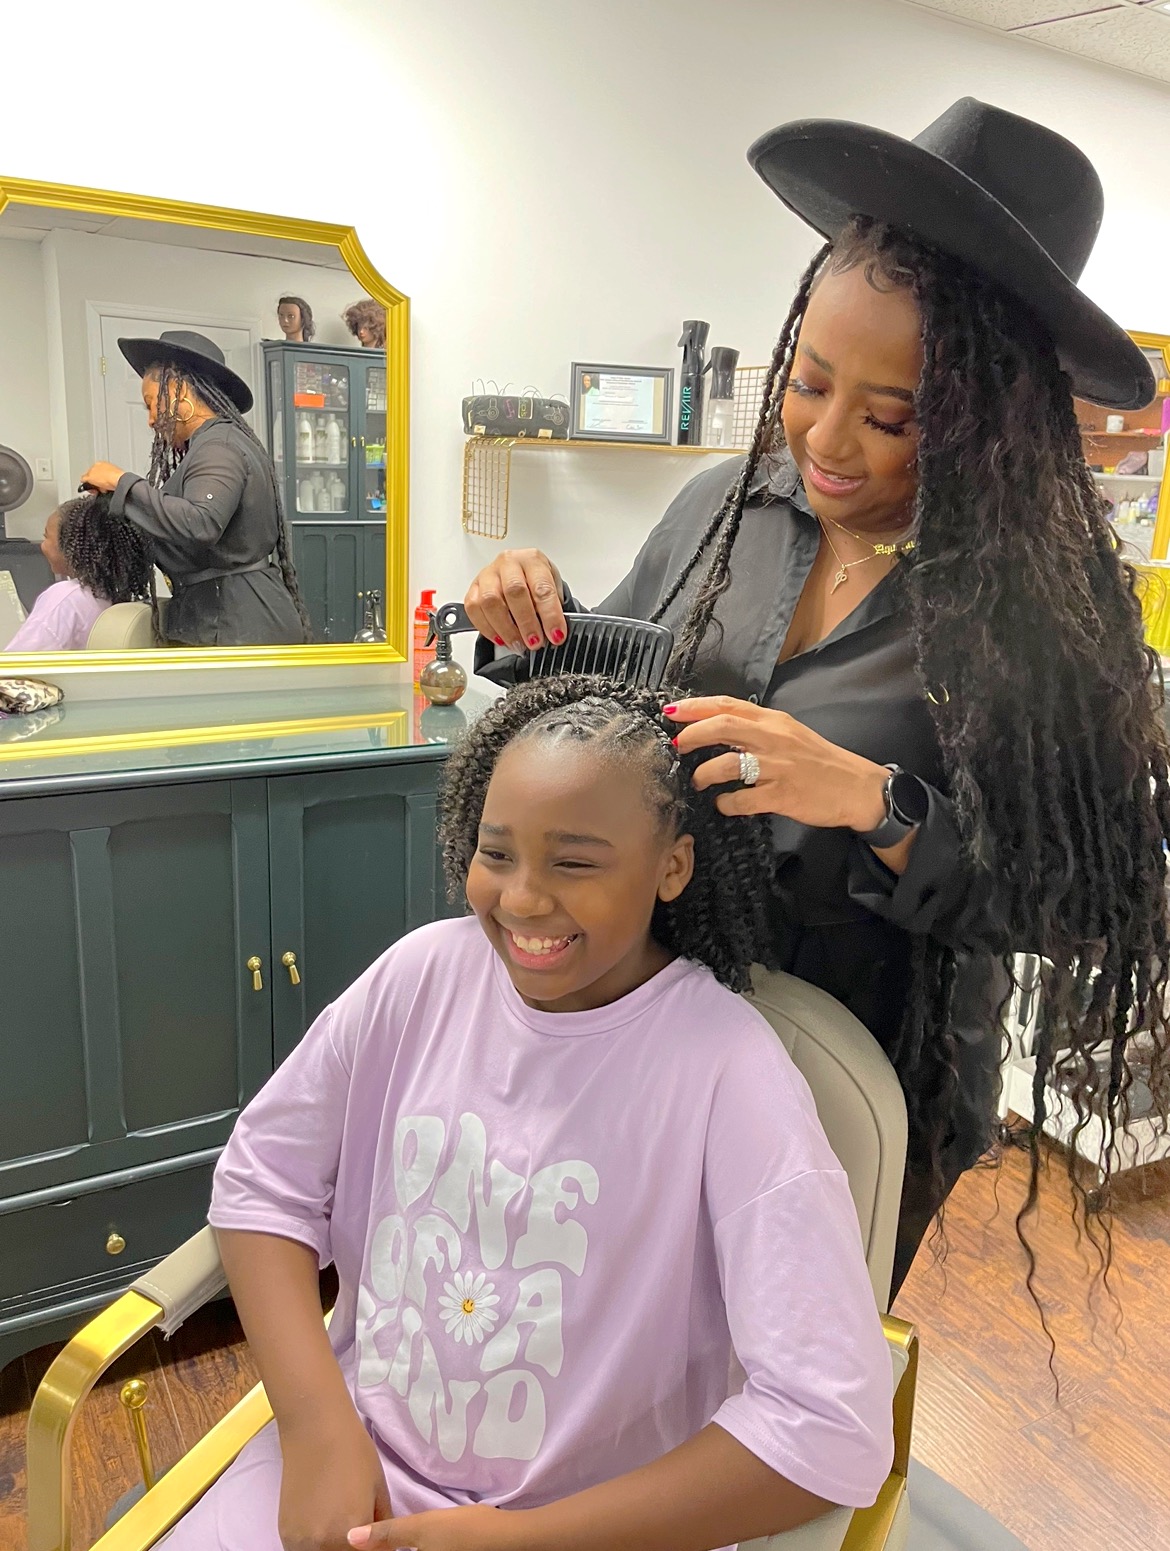 A hair stylist and a young client. The stylist is black, wears a wide brimmed black hat, and has braided hair. The client is a young black girl and has half braided curled hair.